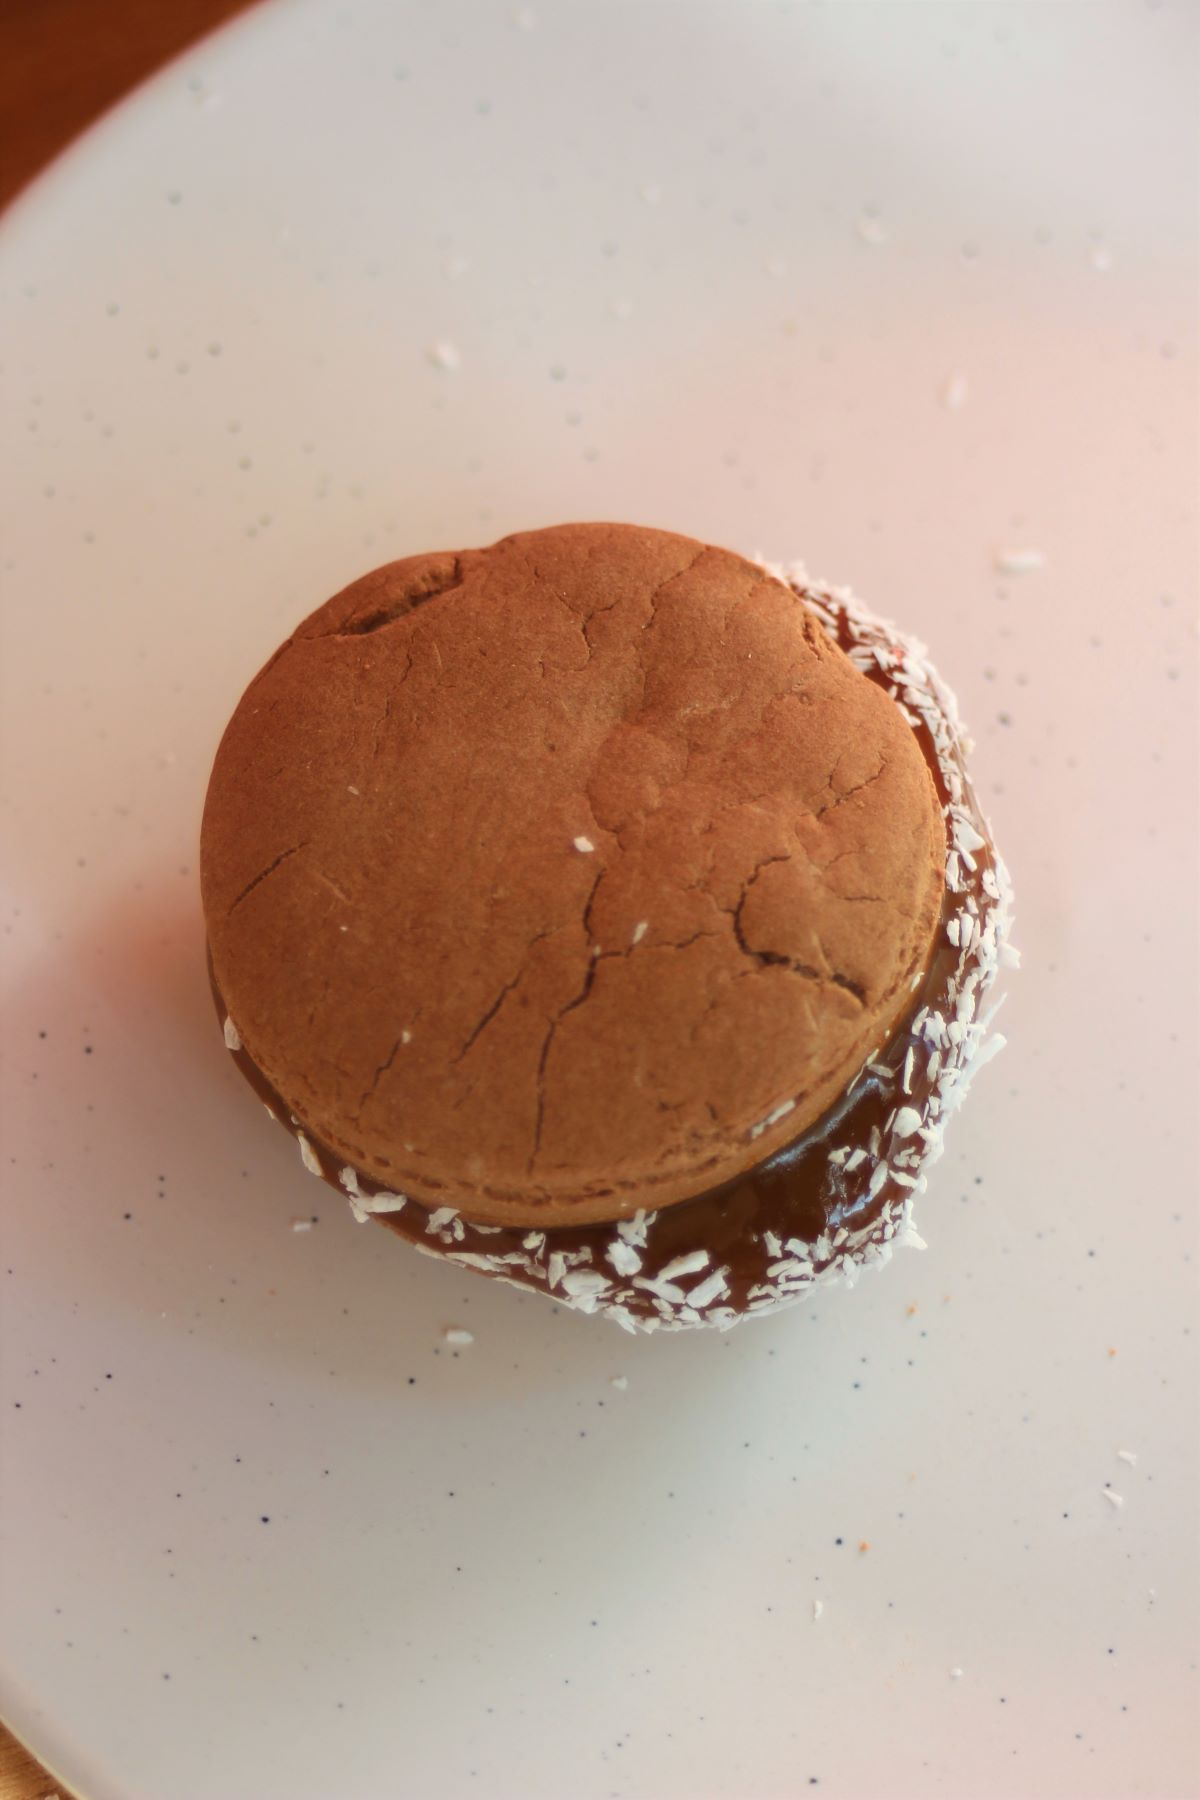 A chocolate alfajor with dulce de leche on a white plate seen from above.